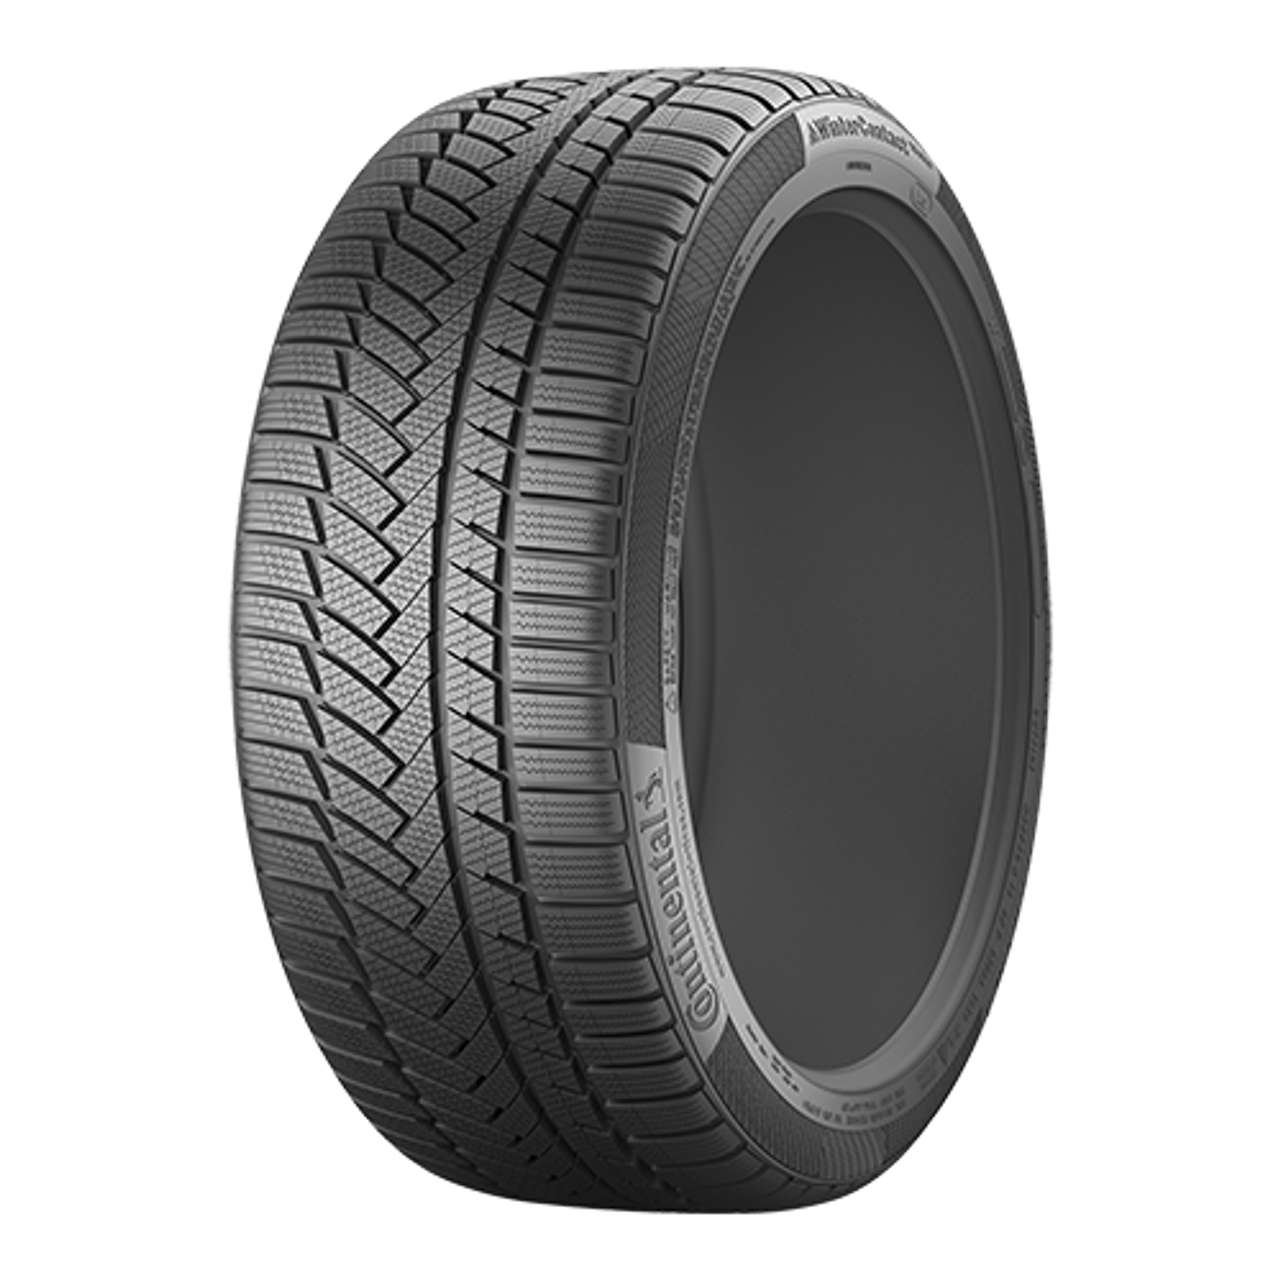 CONTINENTAL WINTERCONTACT TS 850 P SUV (AO) 265/55R19 113H FR BSW von Continental